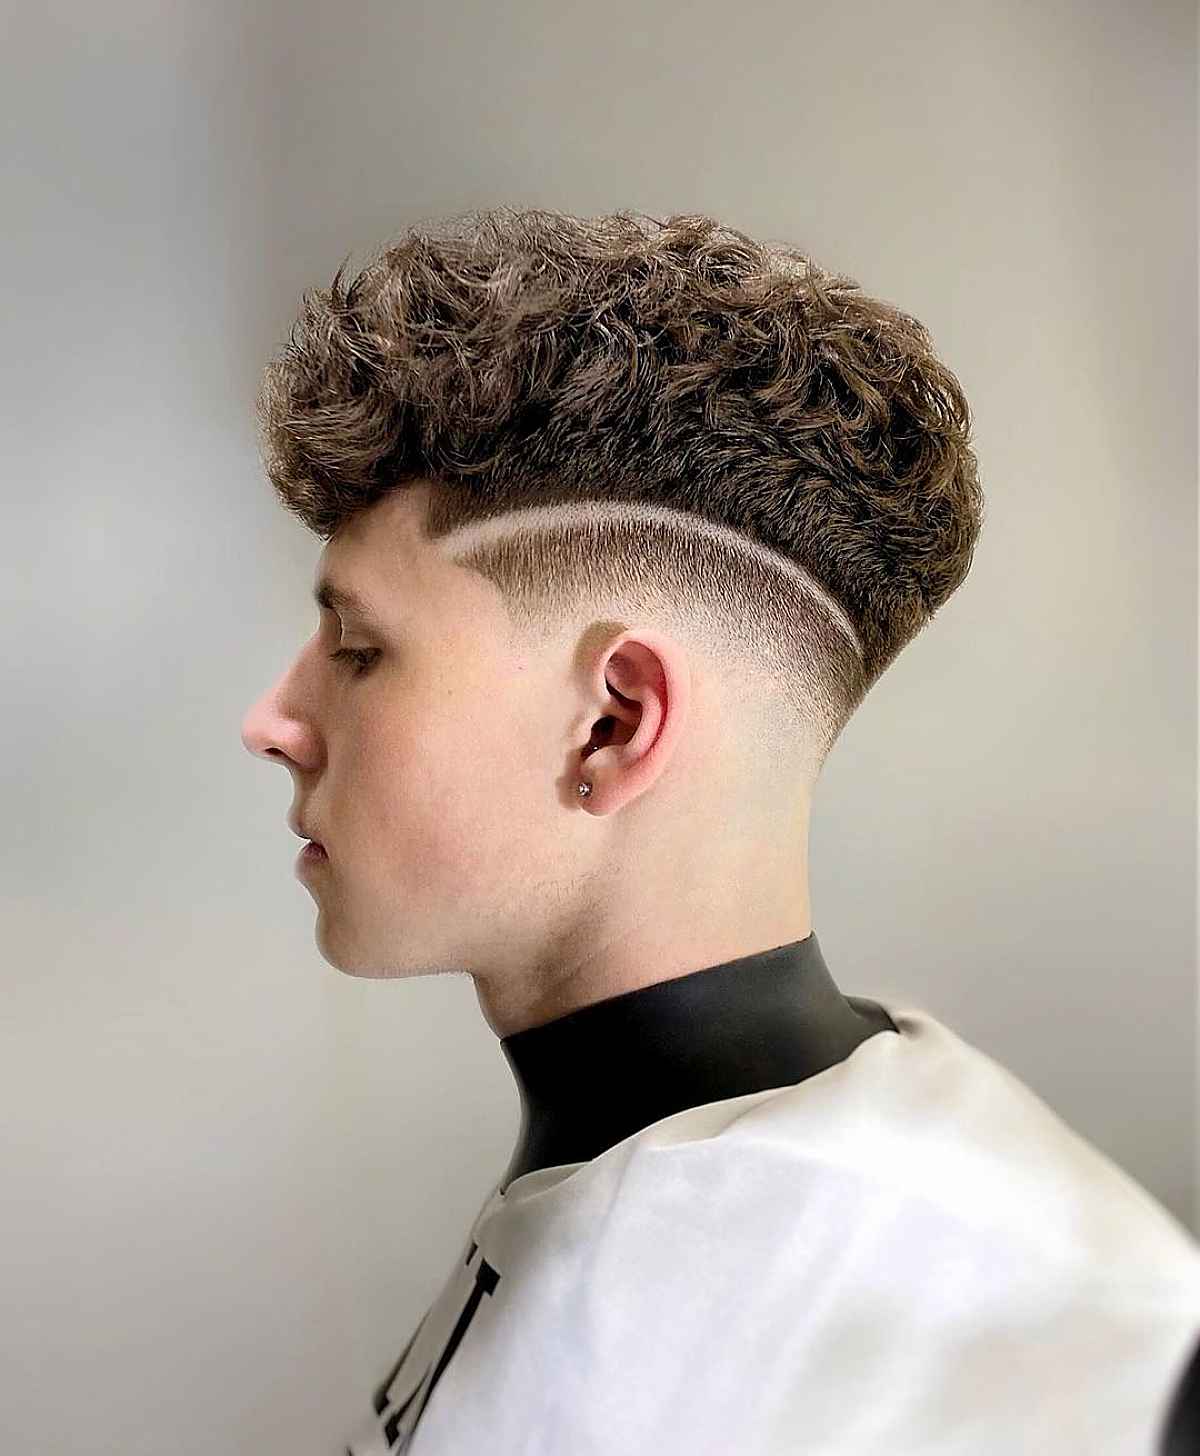 Low Taper Fade Curly Hair Styles for Men